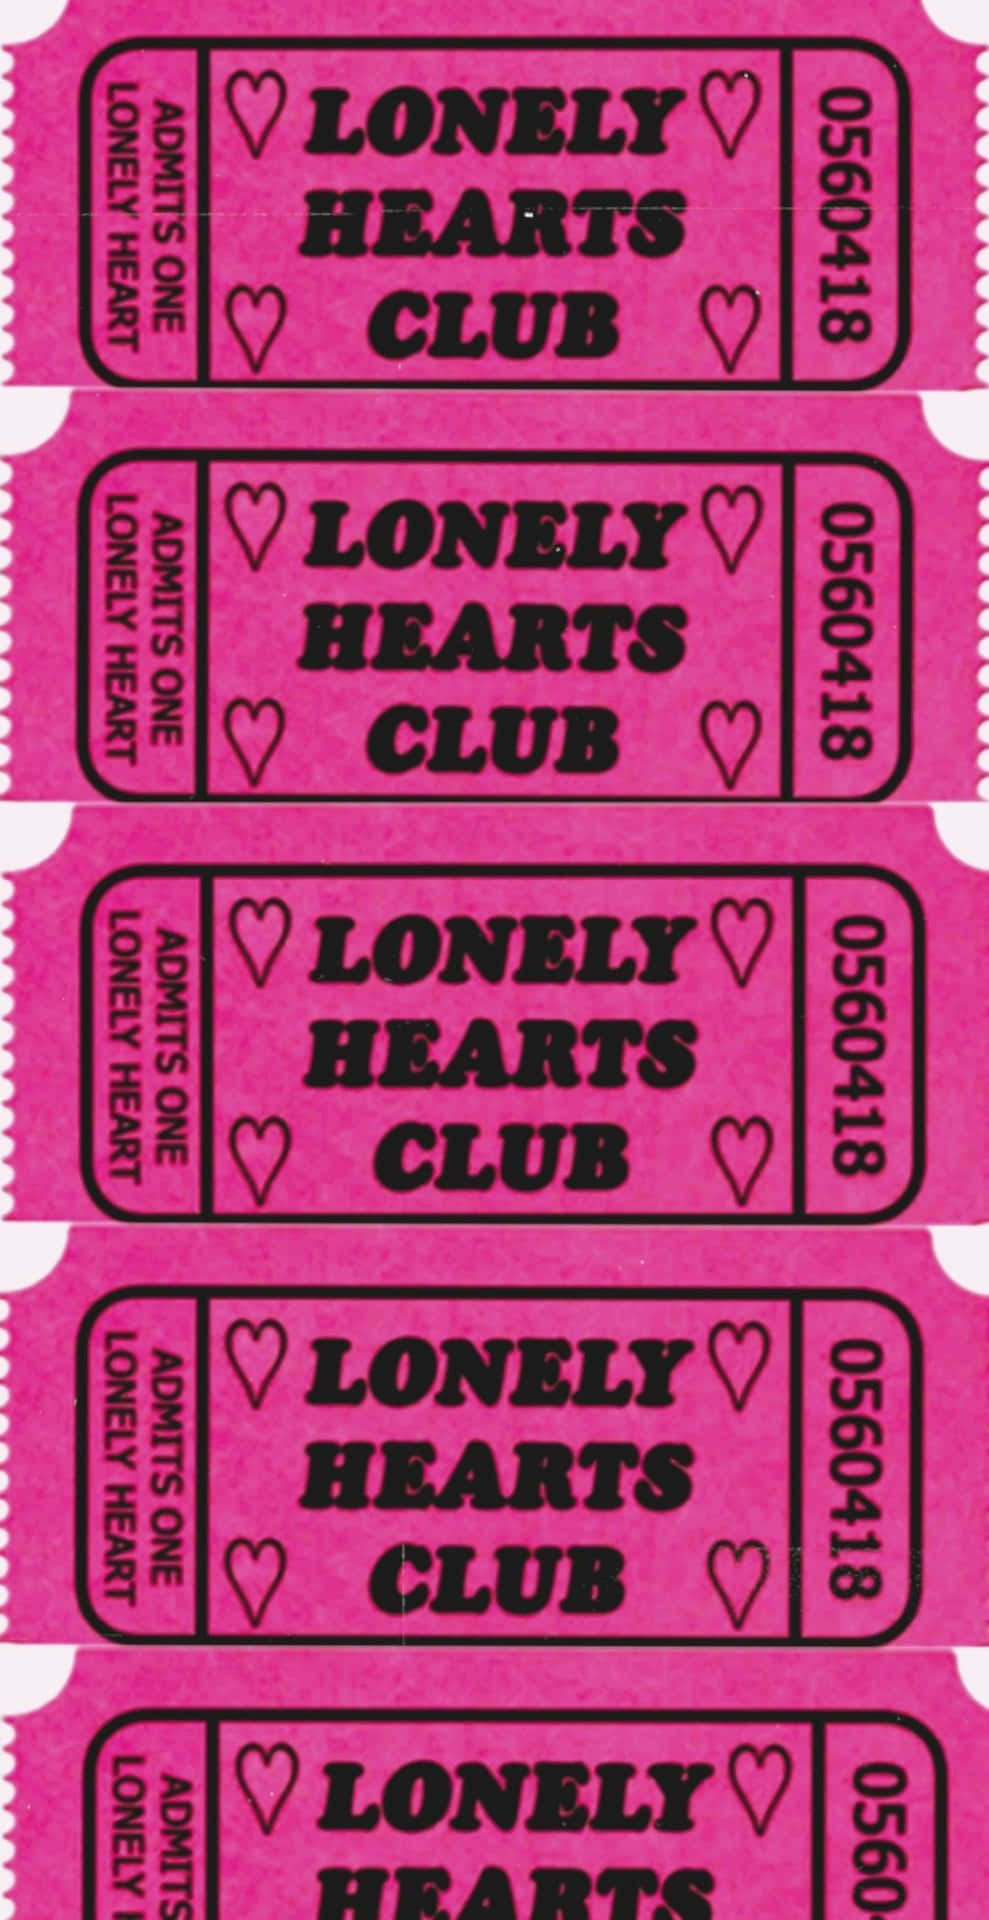 Trendy seamless pattern with y2k pink blurred gradient hearts